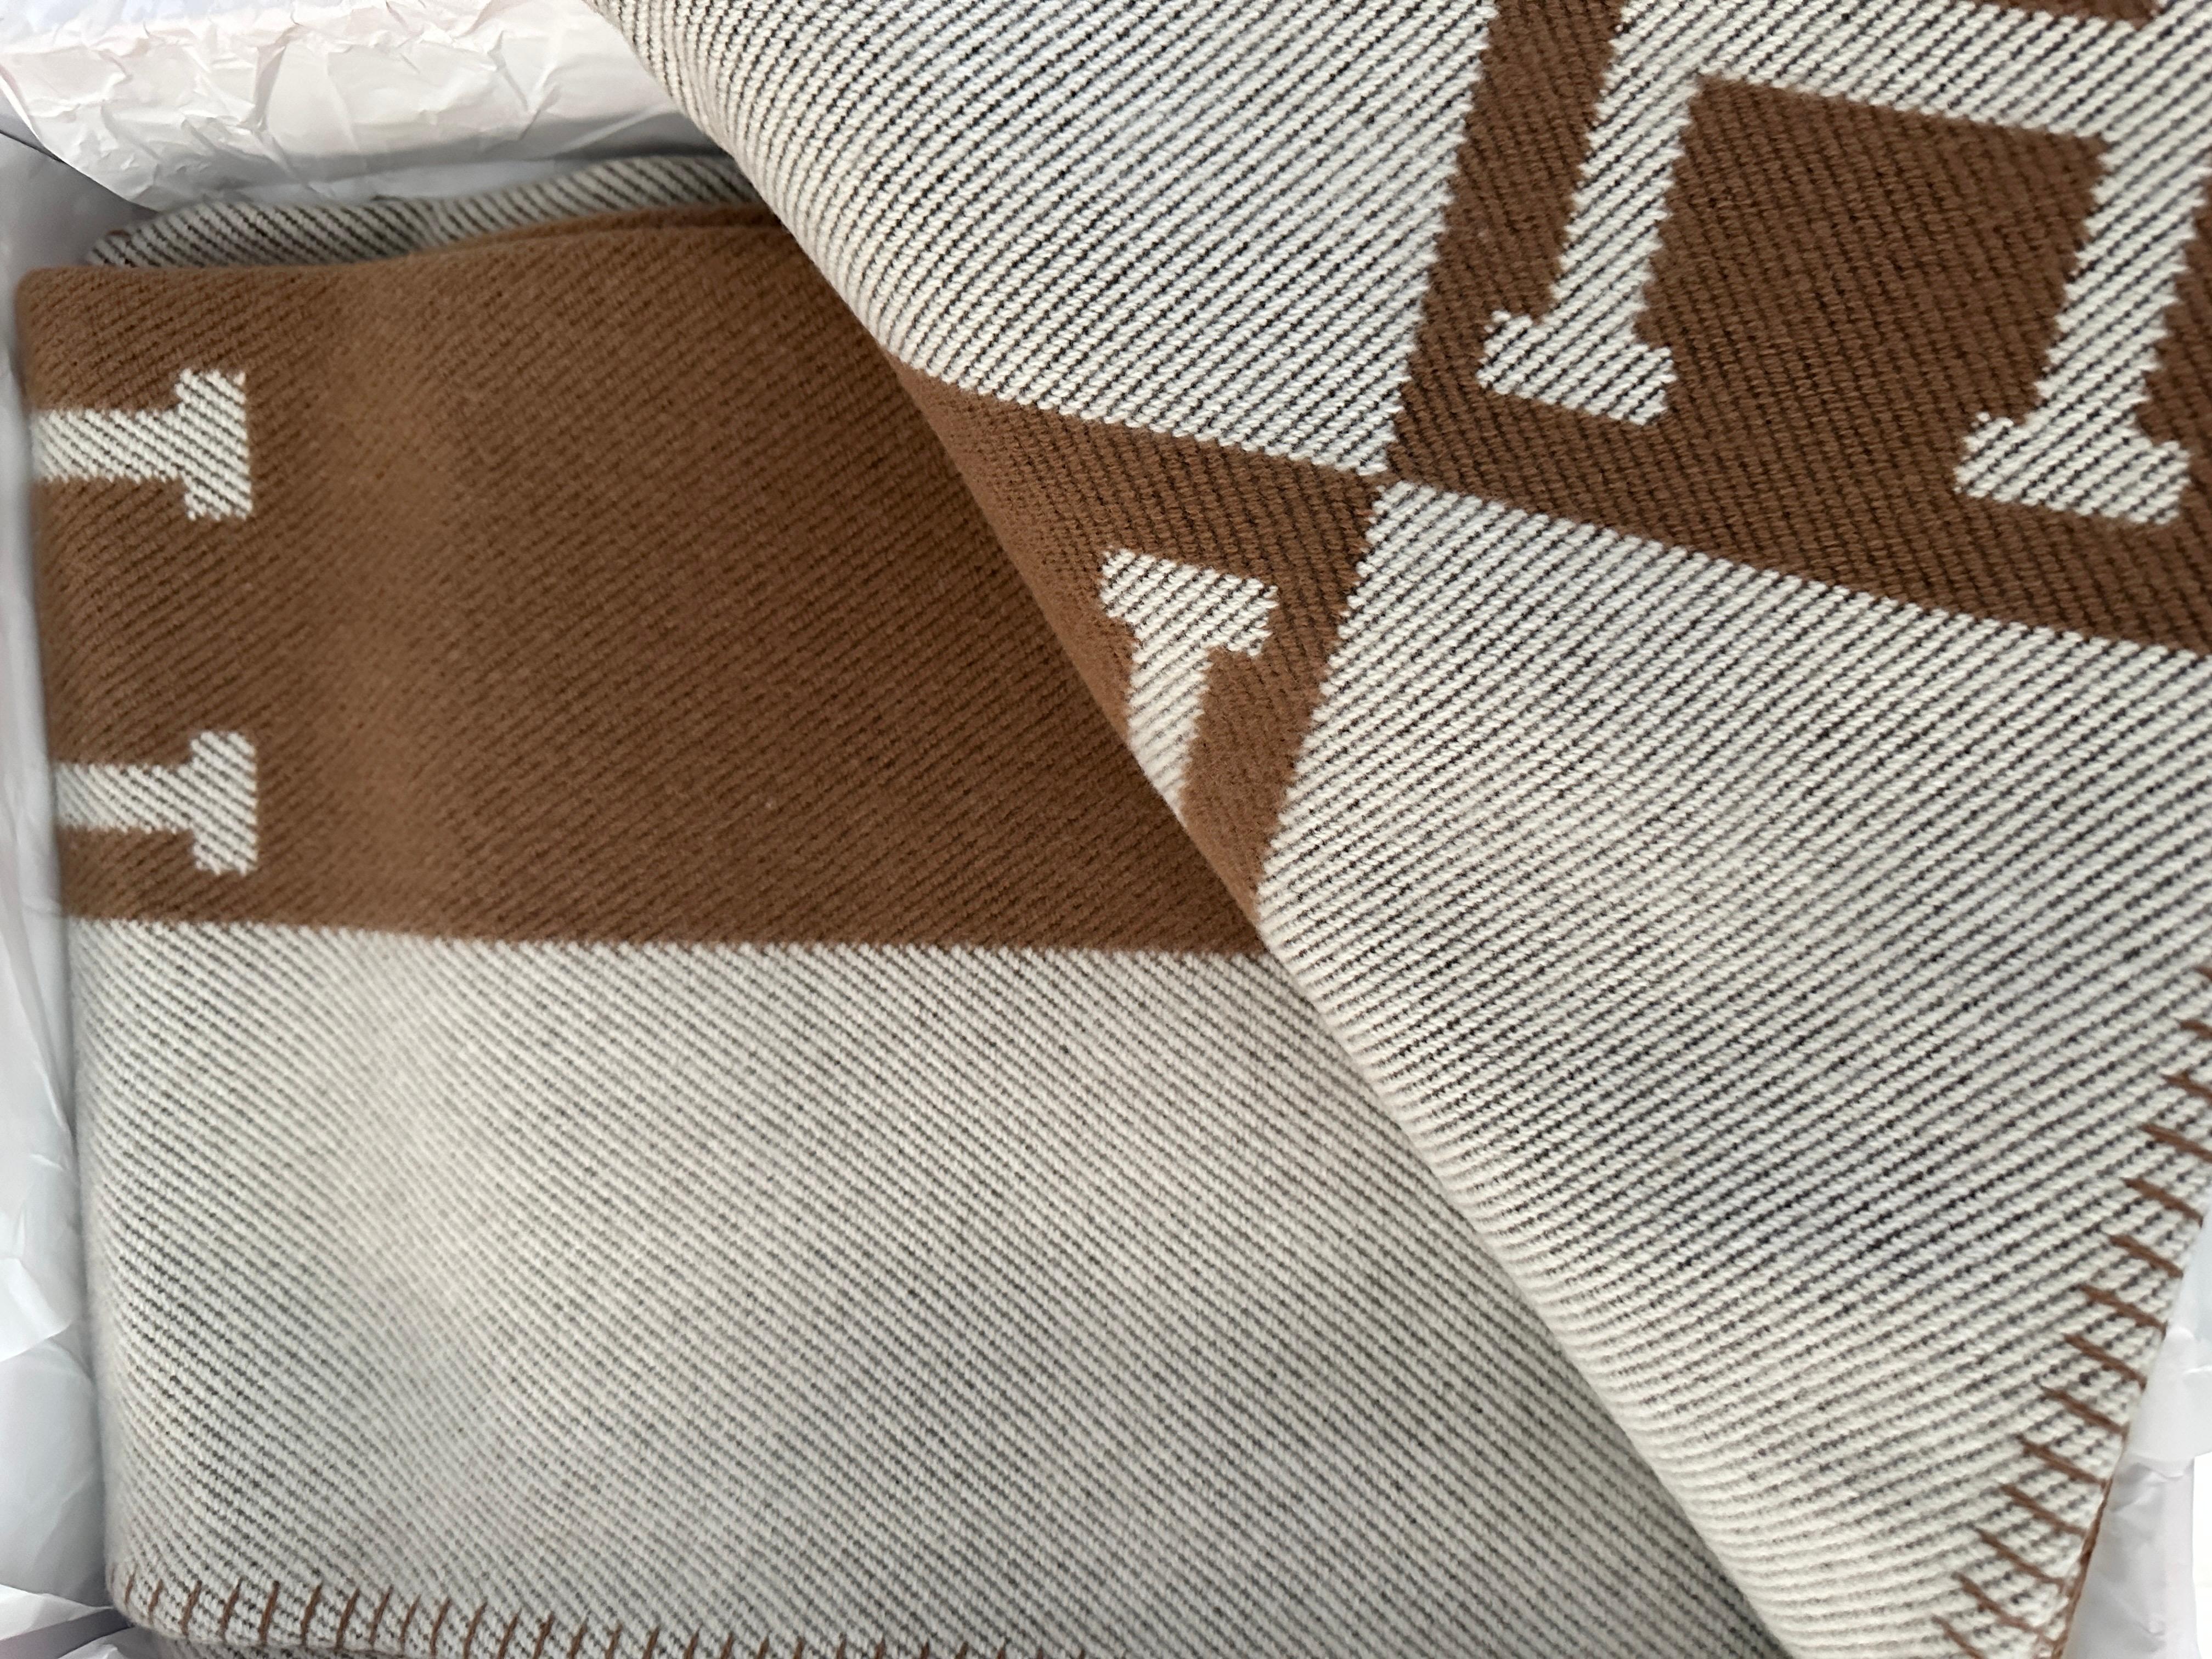 Hermes Avalon Blanket Throw

Color is Ecru and Camel

Brand New
Make a statement in any room with this blanket 
Taken out for photos only
Hermes throw blanket (90% merino wool, 10% cashmere)
Approx Measures 53